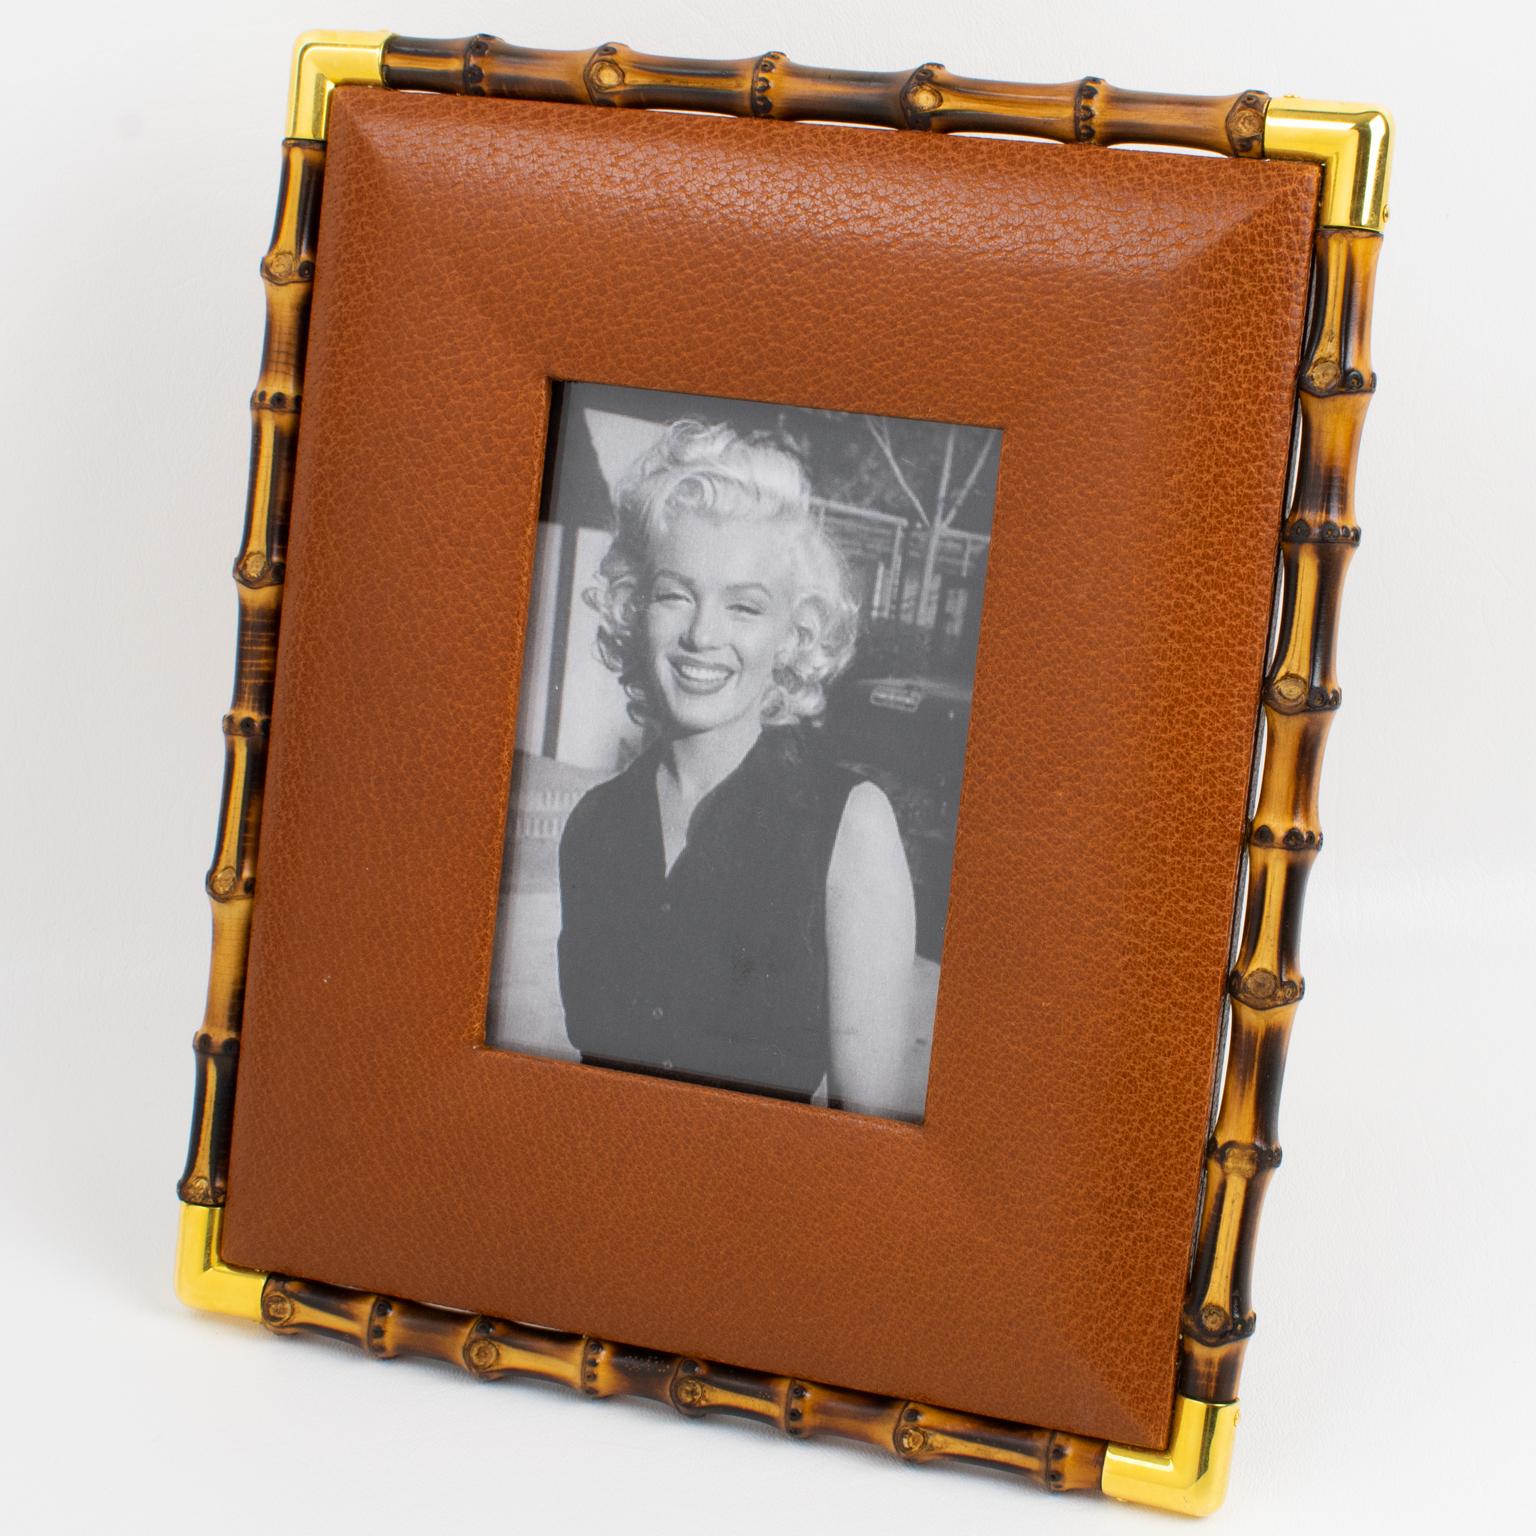 Italian designer Gucci manufactured this superb picture photo frame in the 1980s. The timeless and elegant golden brown cognac calfskin leather with a textured pattern is adorned with genuine bamboo and polished brass accents. The back and easel are